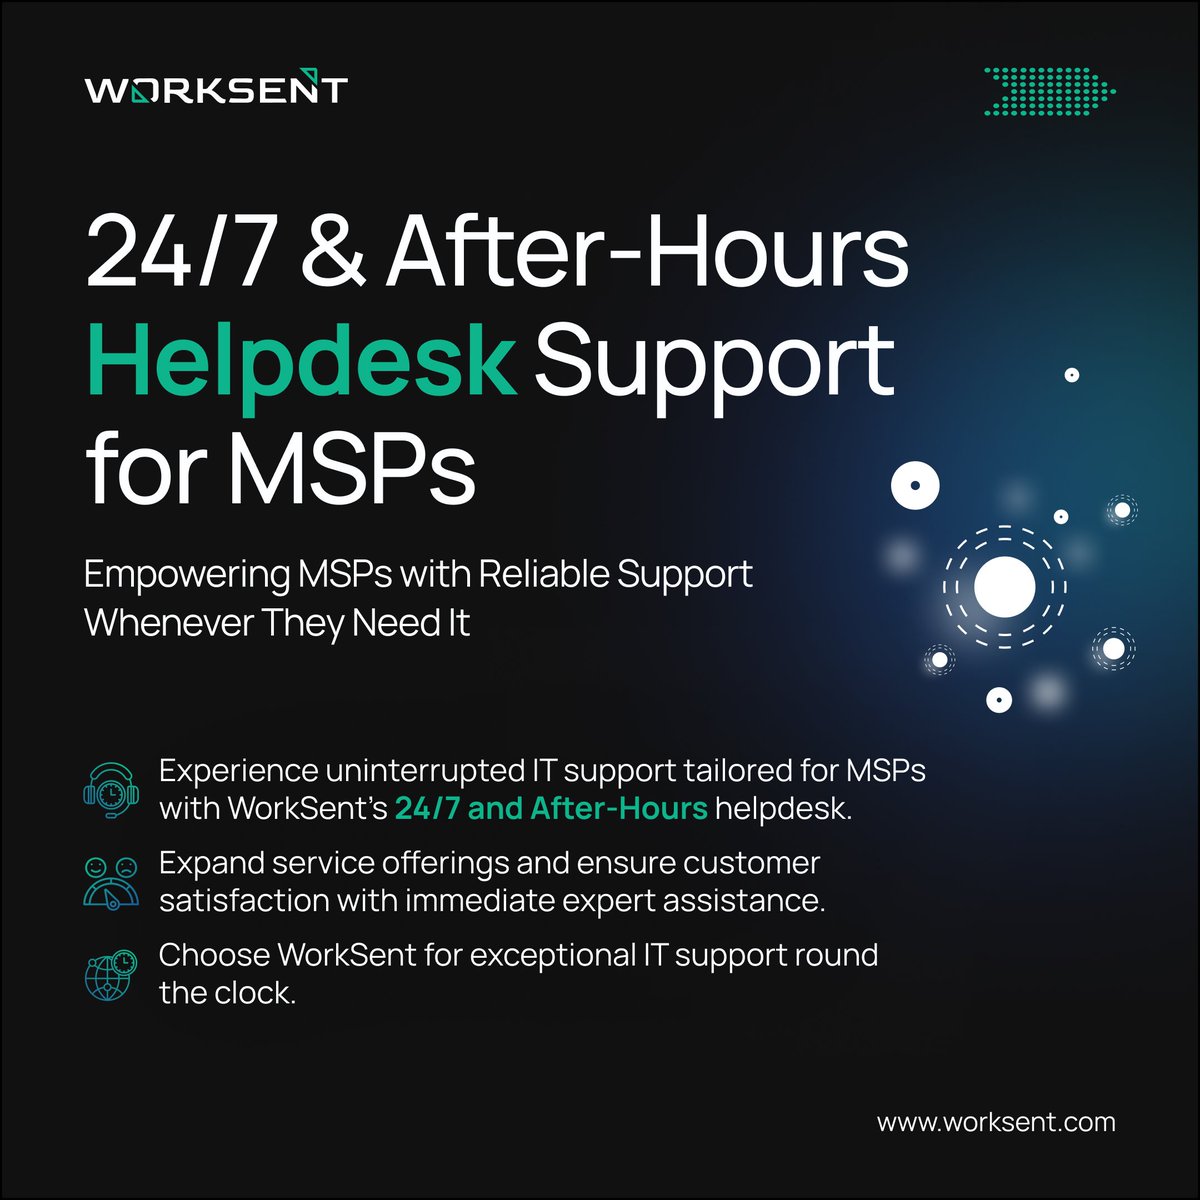 'Get round-the-clock and after-hours Helpdesk support for your MSP business with Worksent. Let's connect and tailor a solution to fit your needs.'

#helpdesksupport #helpdesk #24x7 #24/7Support #MSP #Whitelabelsupport #whitelabel #techsupport #USA #Managedservices #managedit